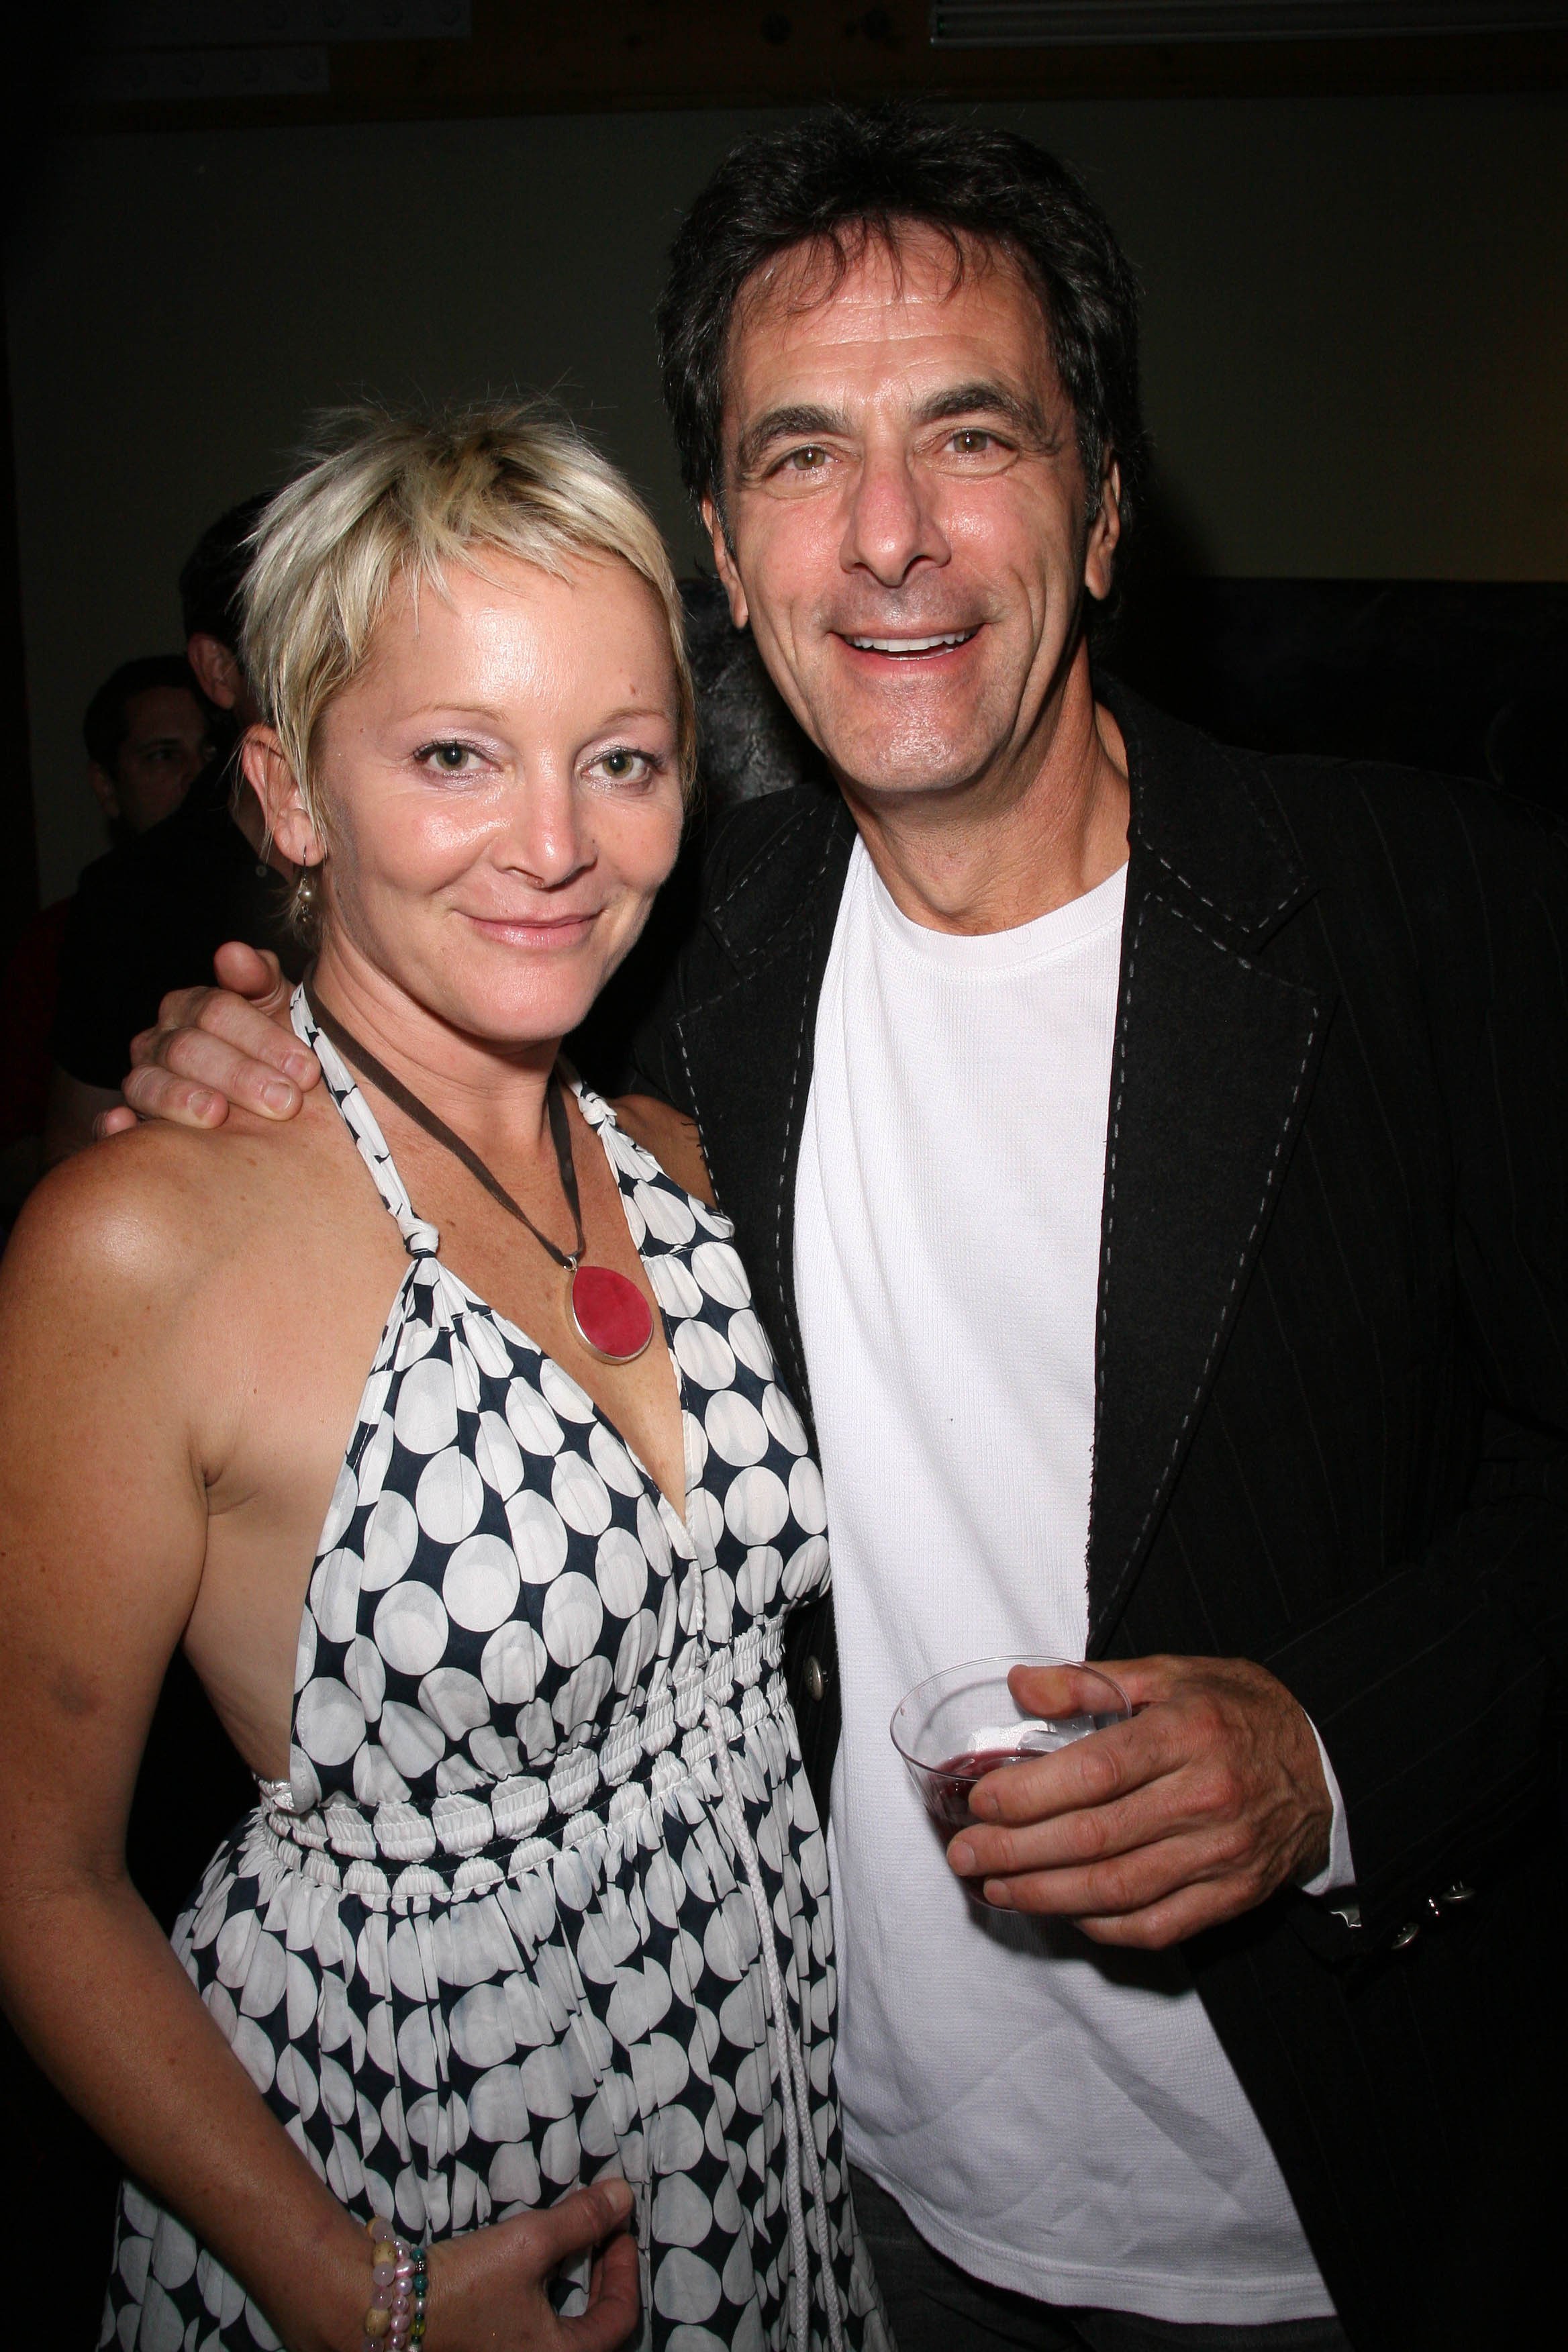 Mary Mara and Robin Thomas at a party for the opening night of "In Heat" | Source: Shutterstock